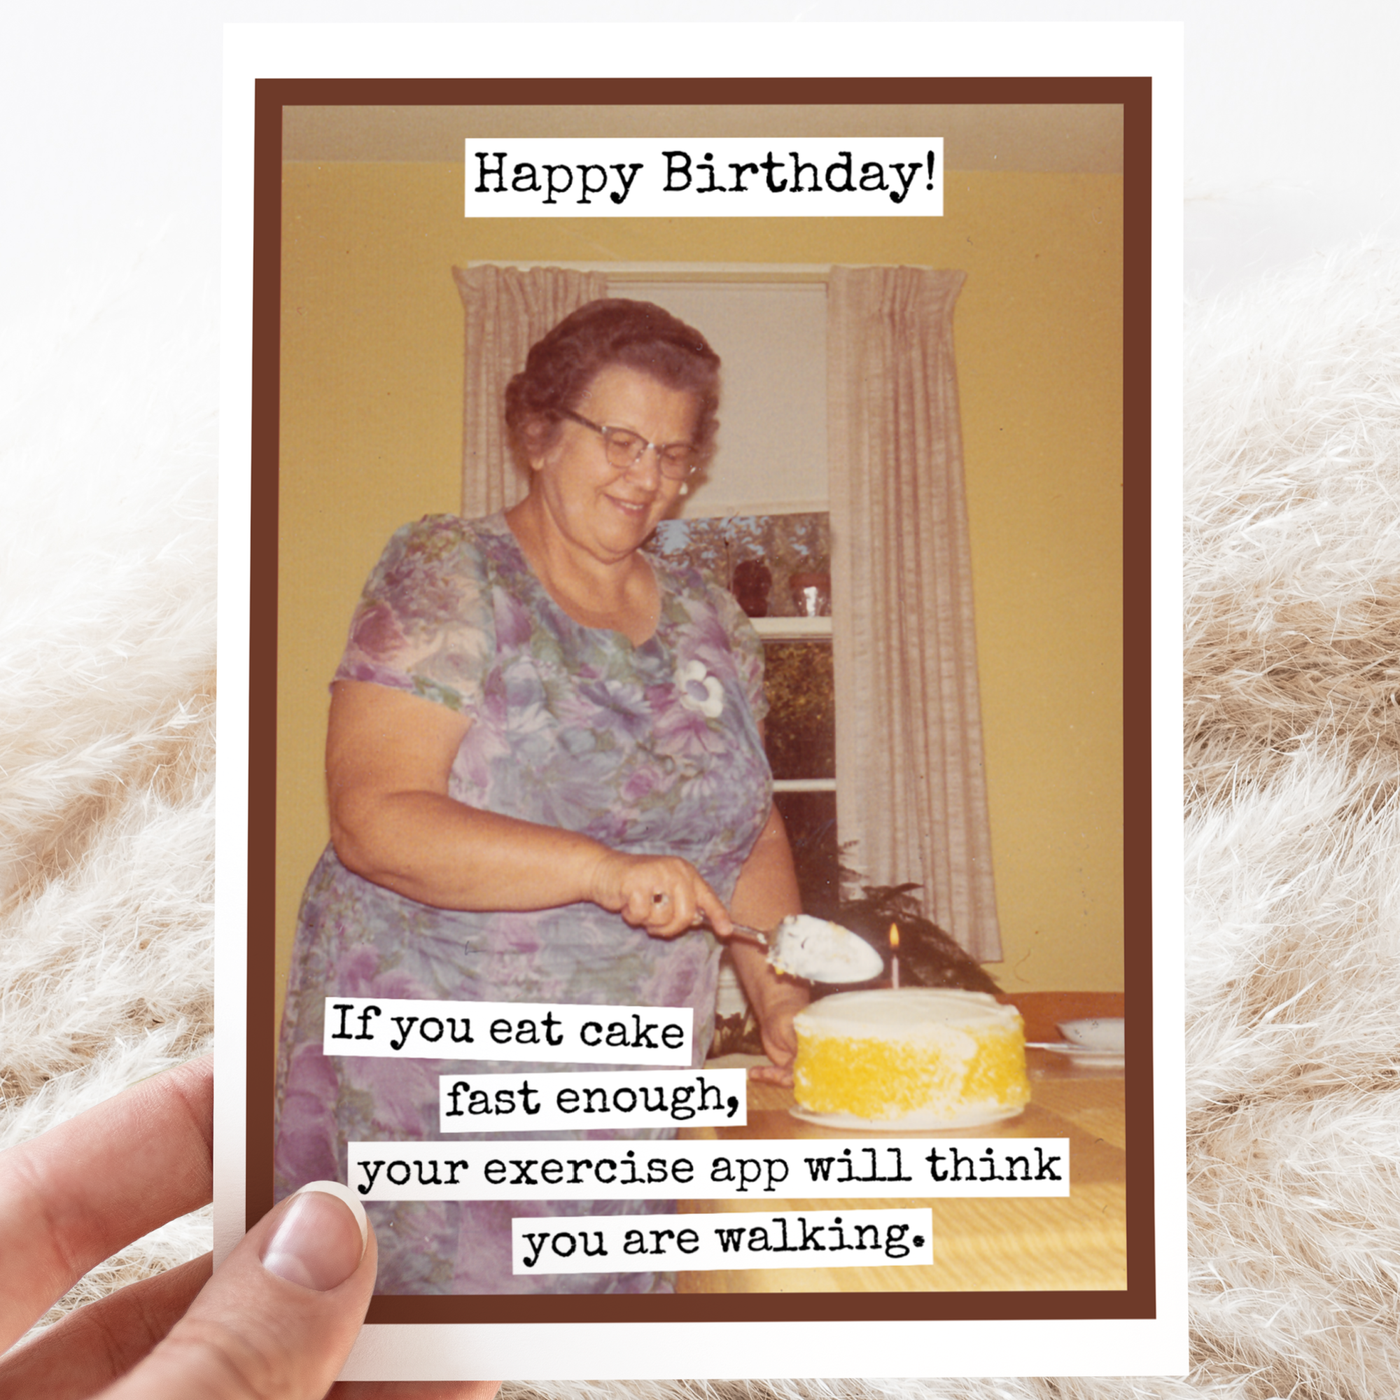 If You Eat Cake Fast Enough... Vintage-Birthday Card